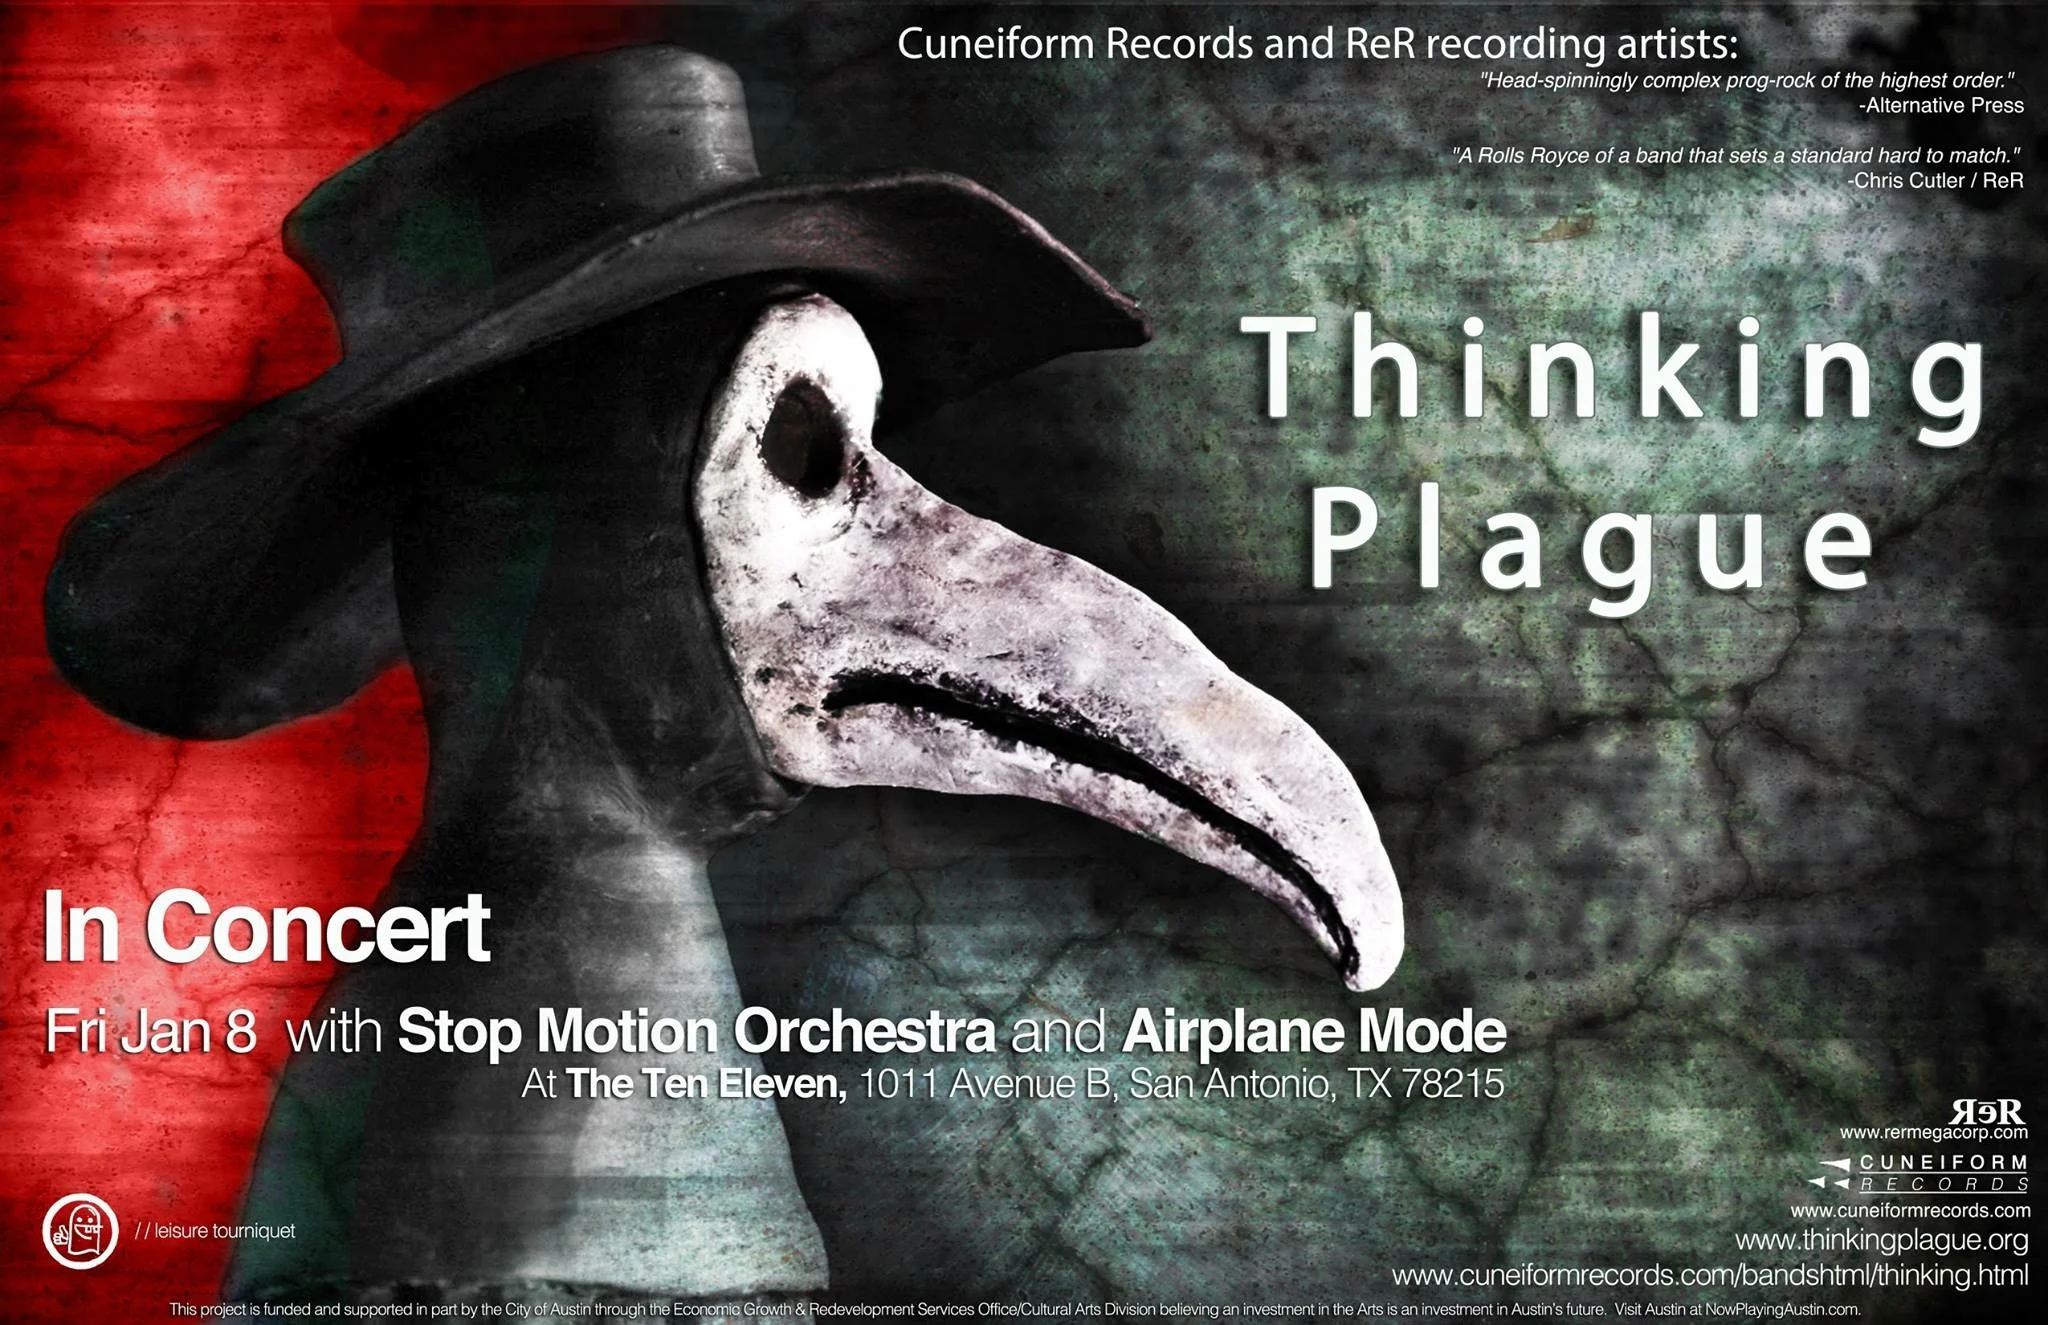 Thinking Plague, Stop Motion Orchestra, Airplane Mode at The Ten Eleven